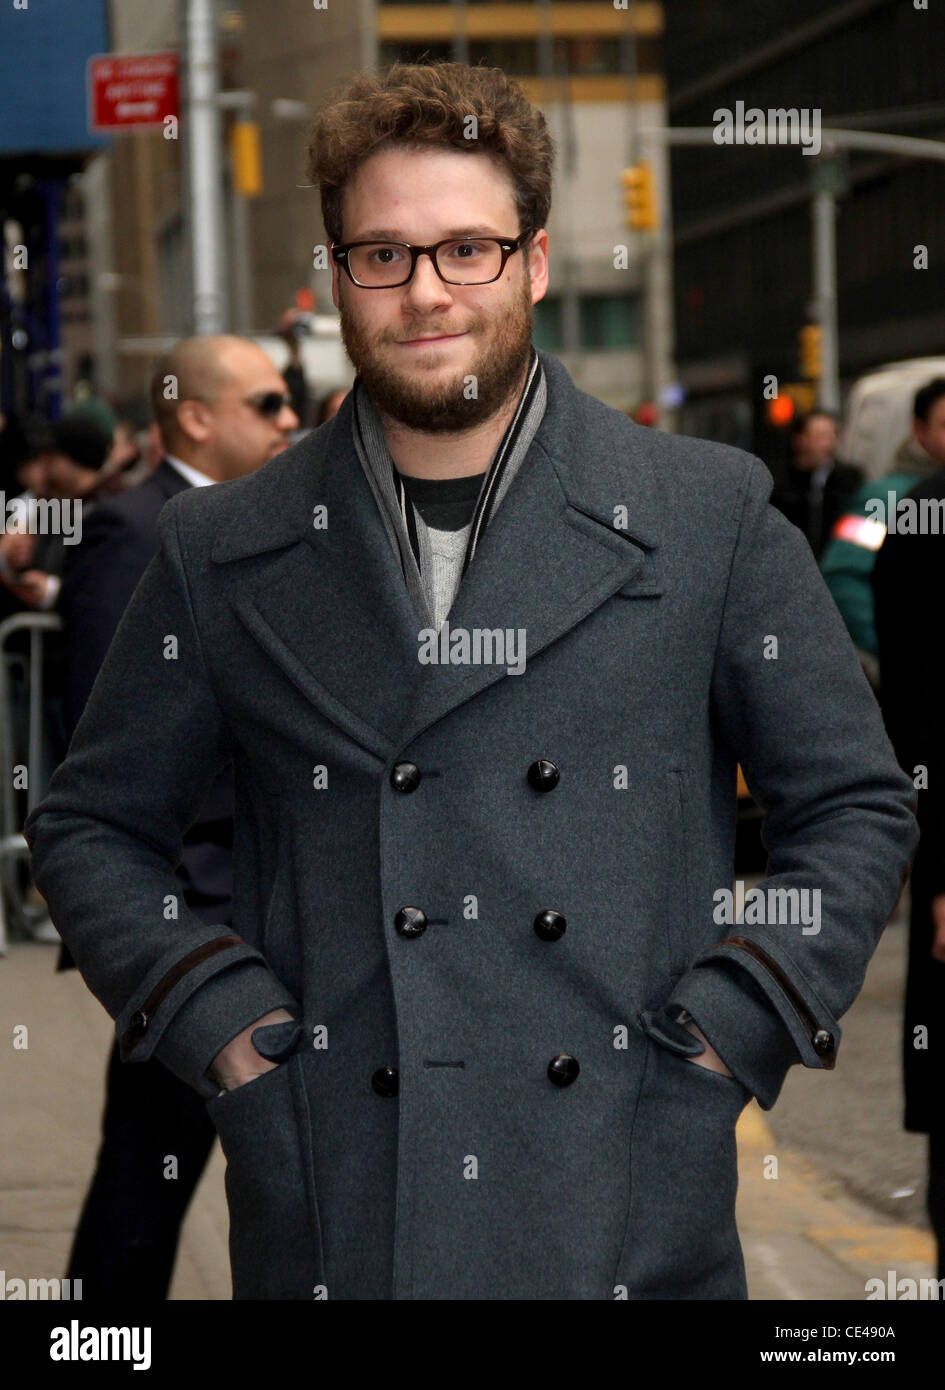 Seth Rogen outside The Ed Sullivan Theater for 'The Late Show with David Letterman'.  New York City, USA - 06.01.11 Stock Photo